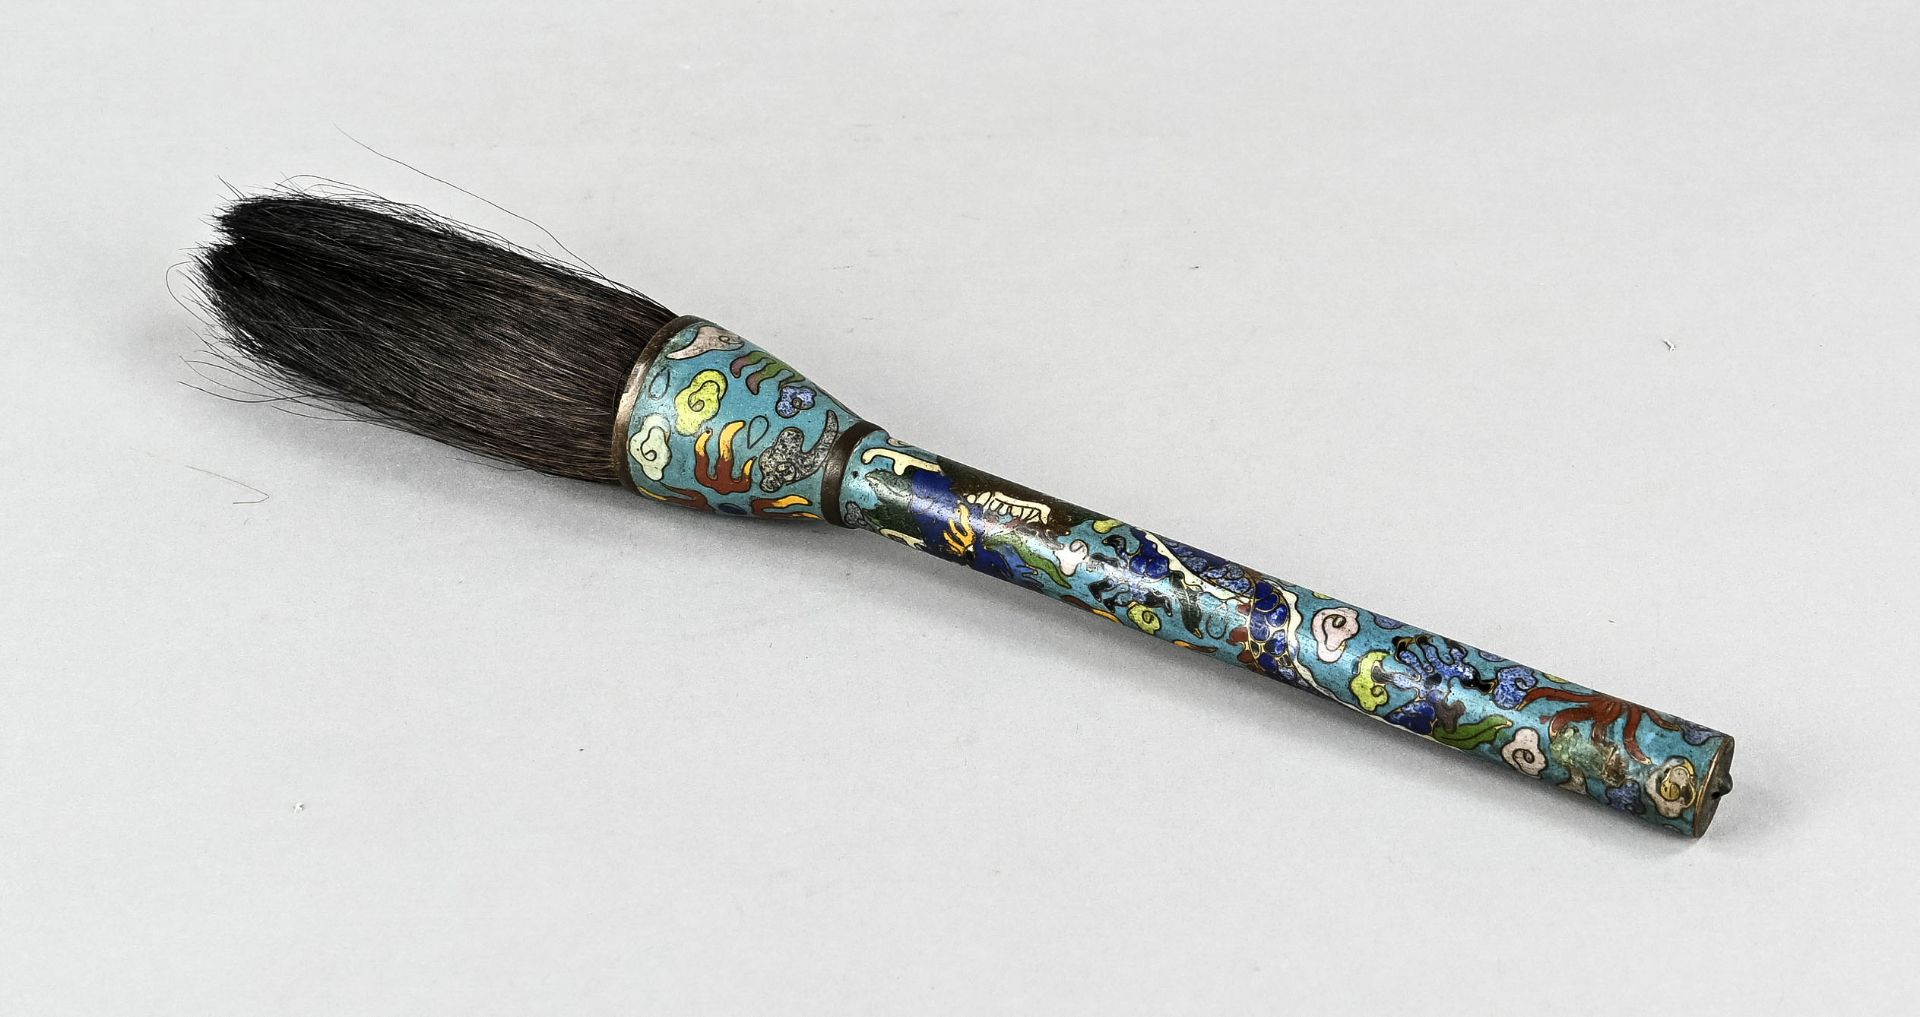 Calligraphy brushes, China, painting brushes, Chinese writing brushes made of real hair, handle in  - Image 2 of 2